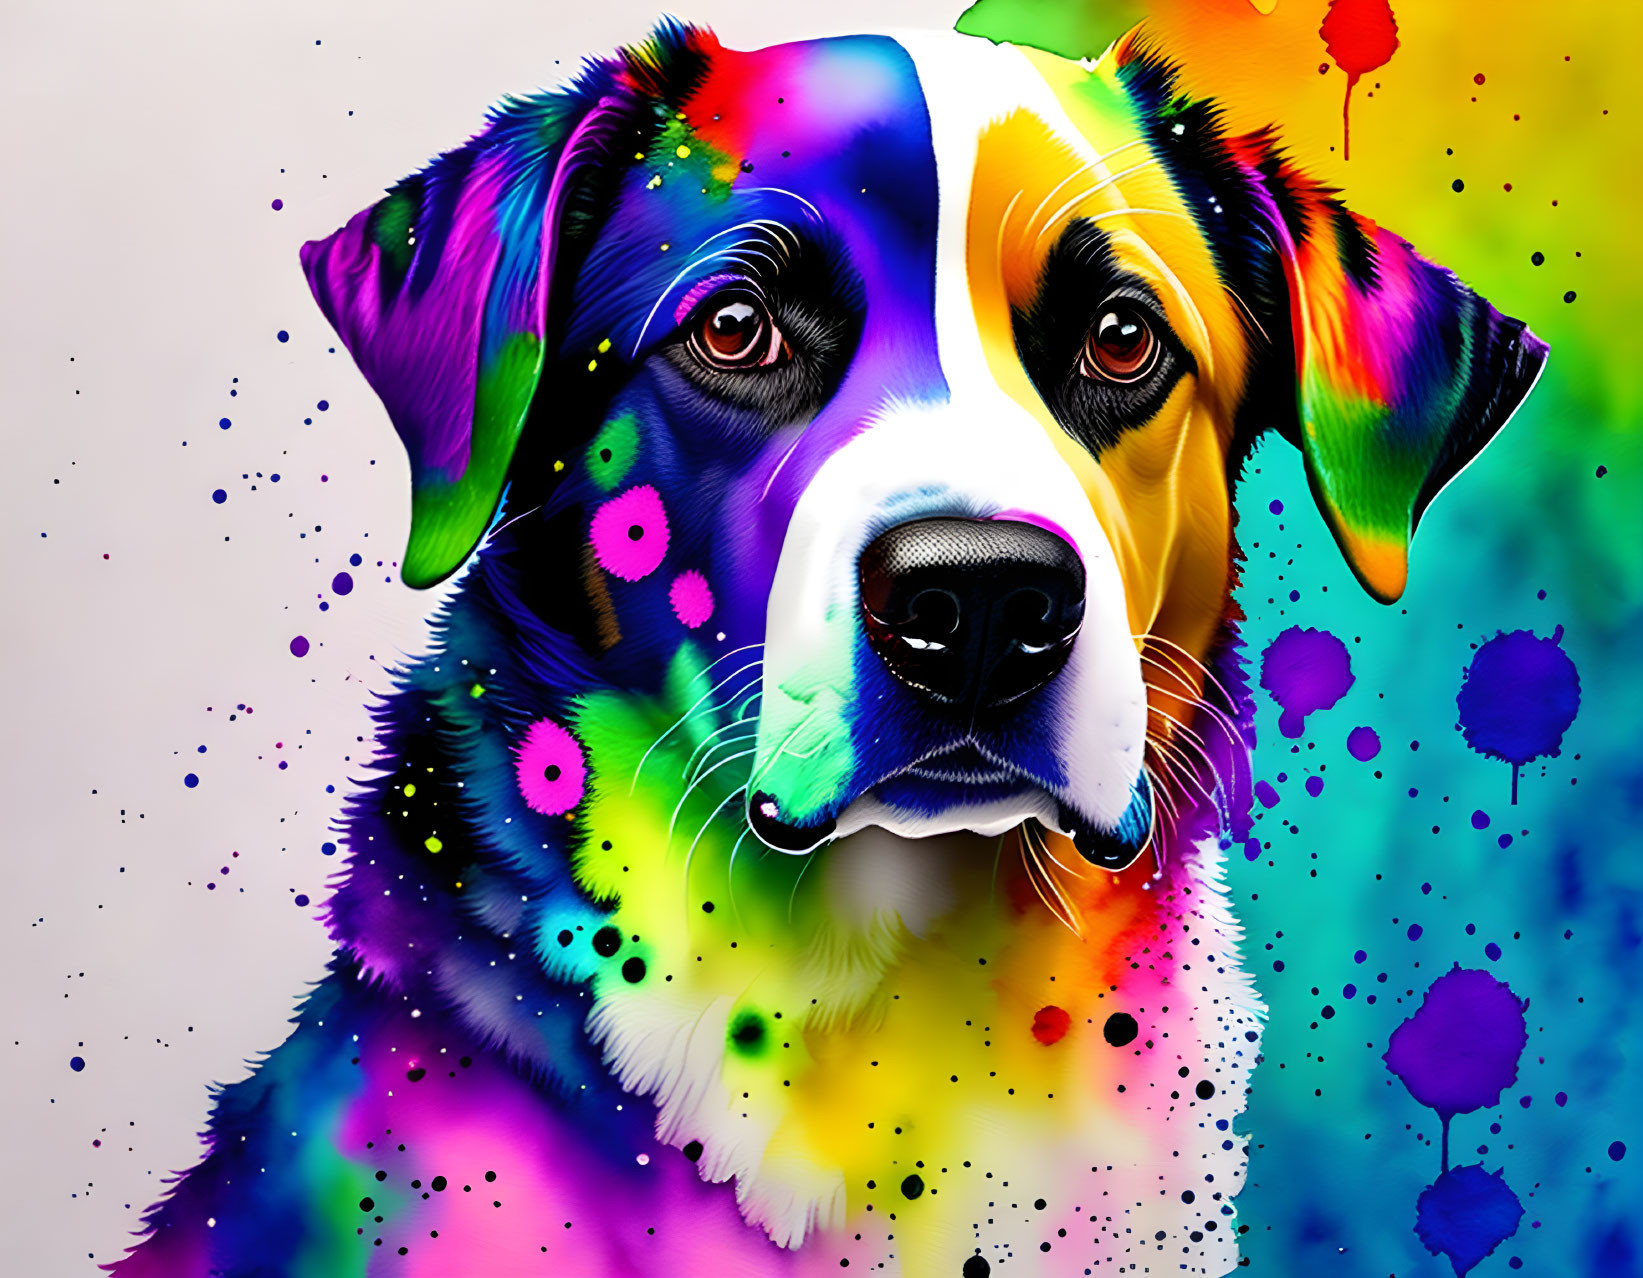 Colorful Abstract Painting of Dog with Splashes and Patterns